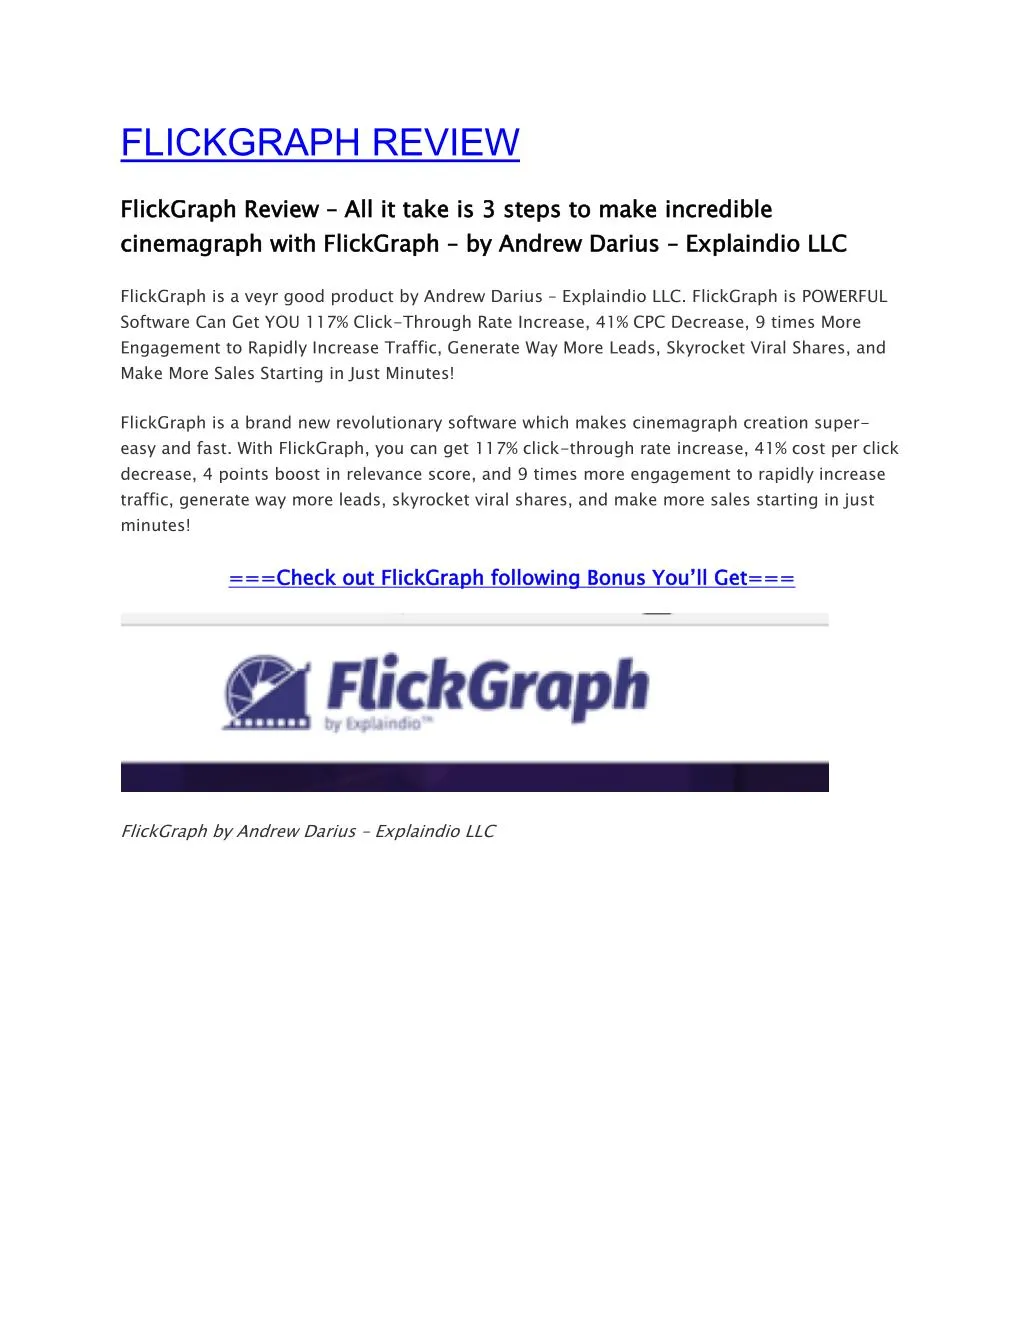 flickgraph review